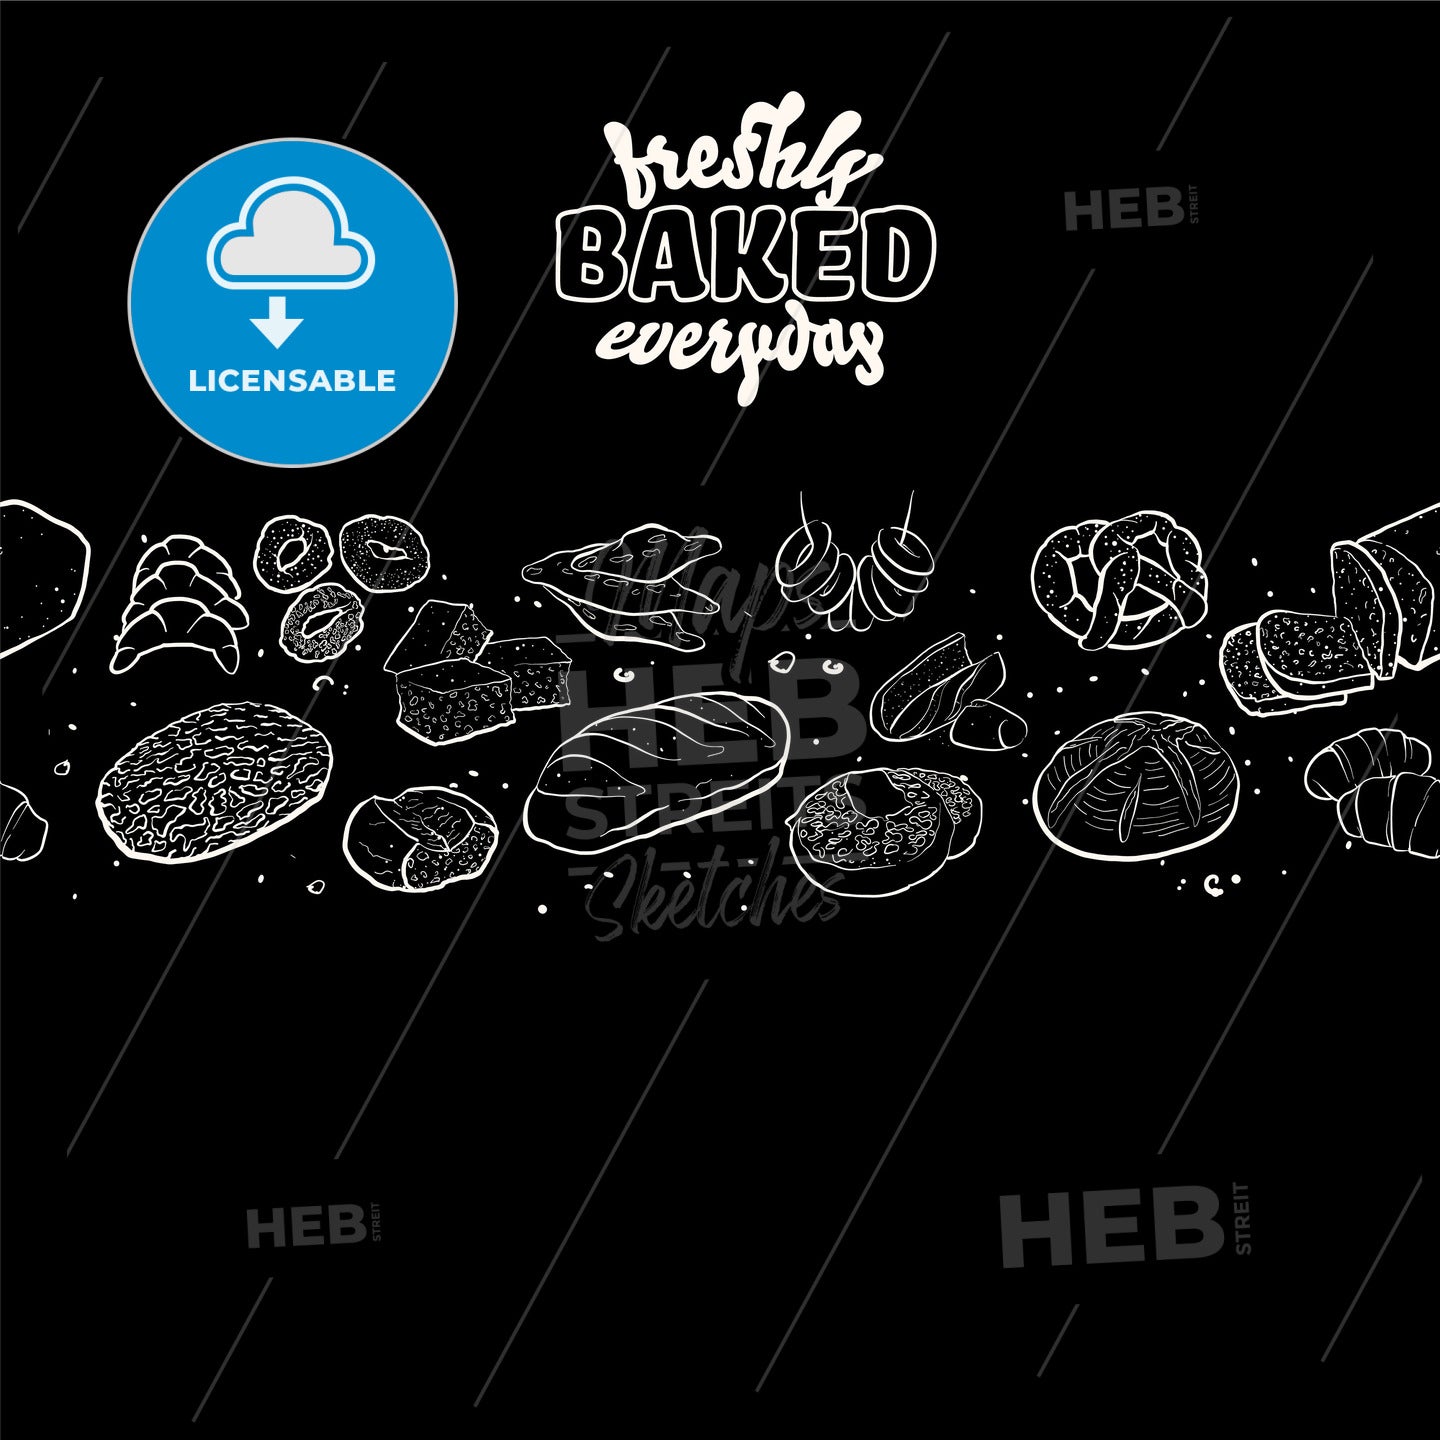 Outline version of Freshly baked everyday label with illustrations of various types of bread on blackboard – instant download